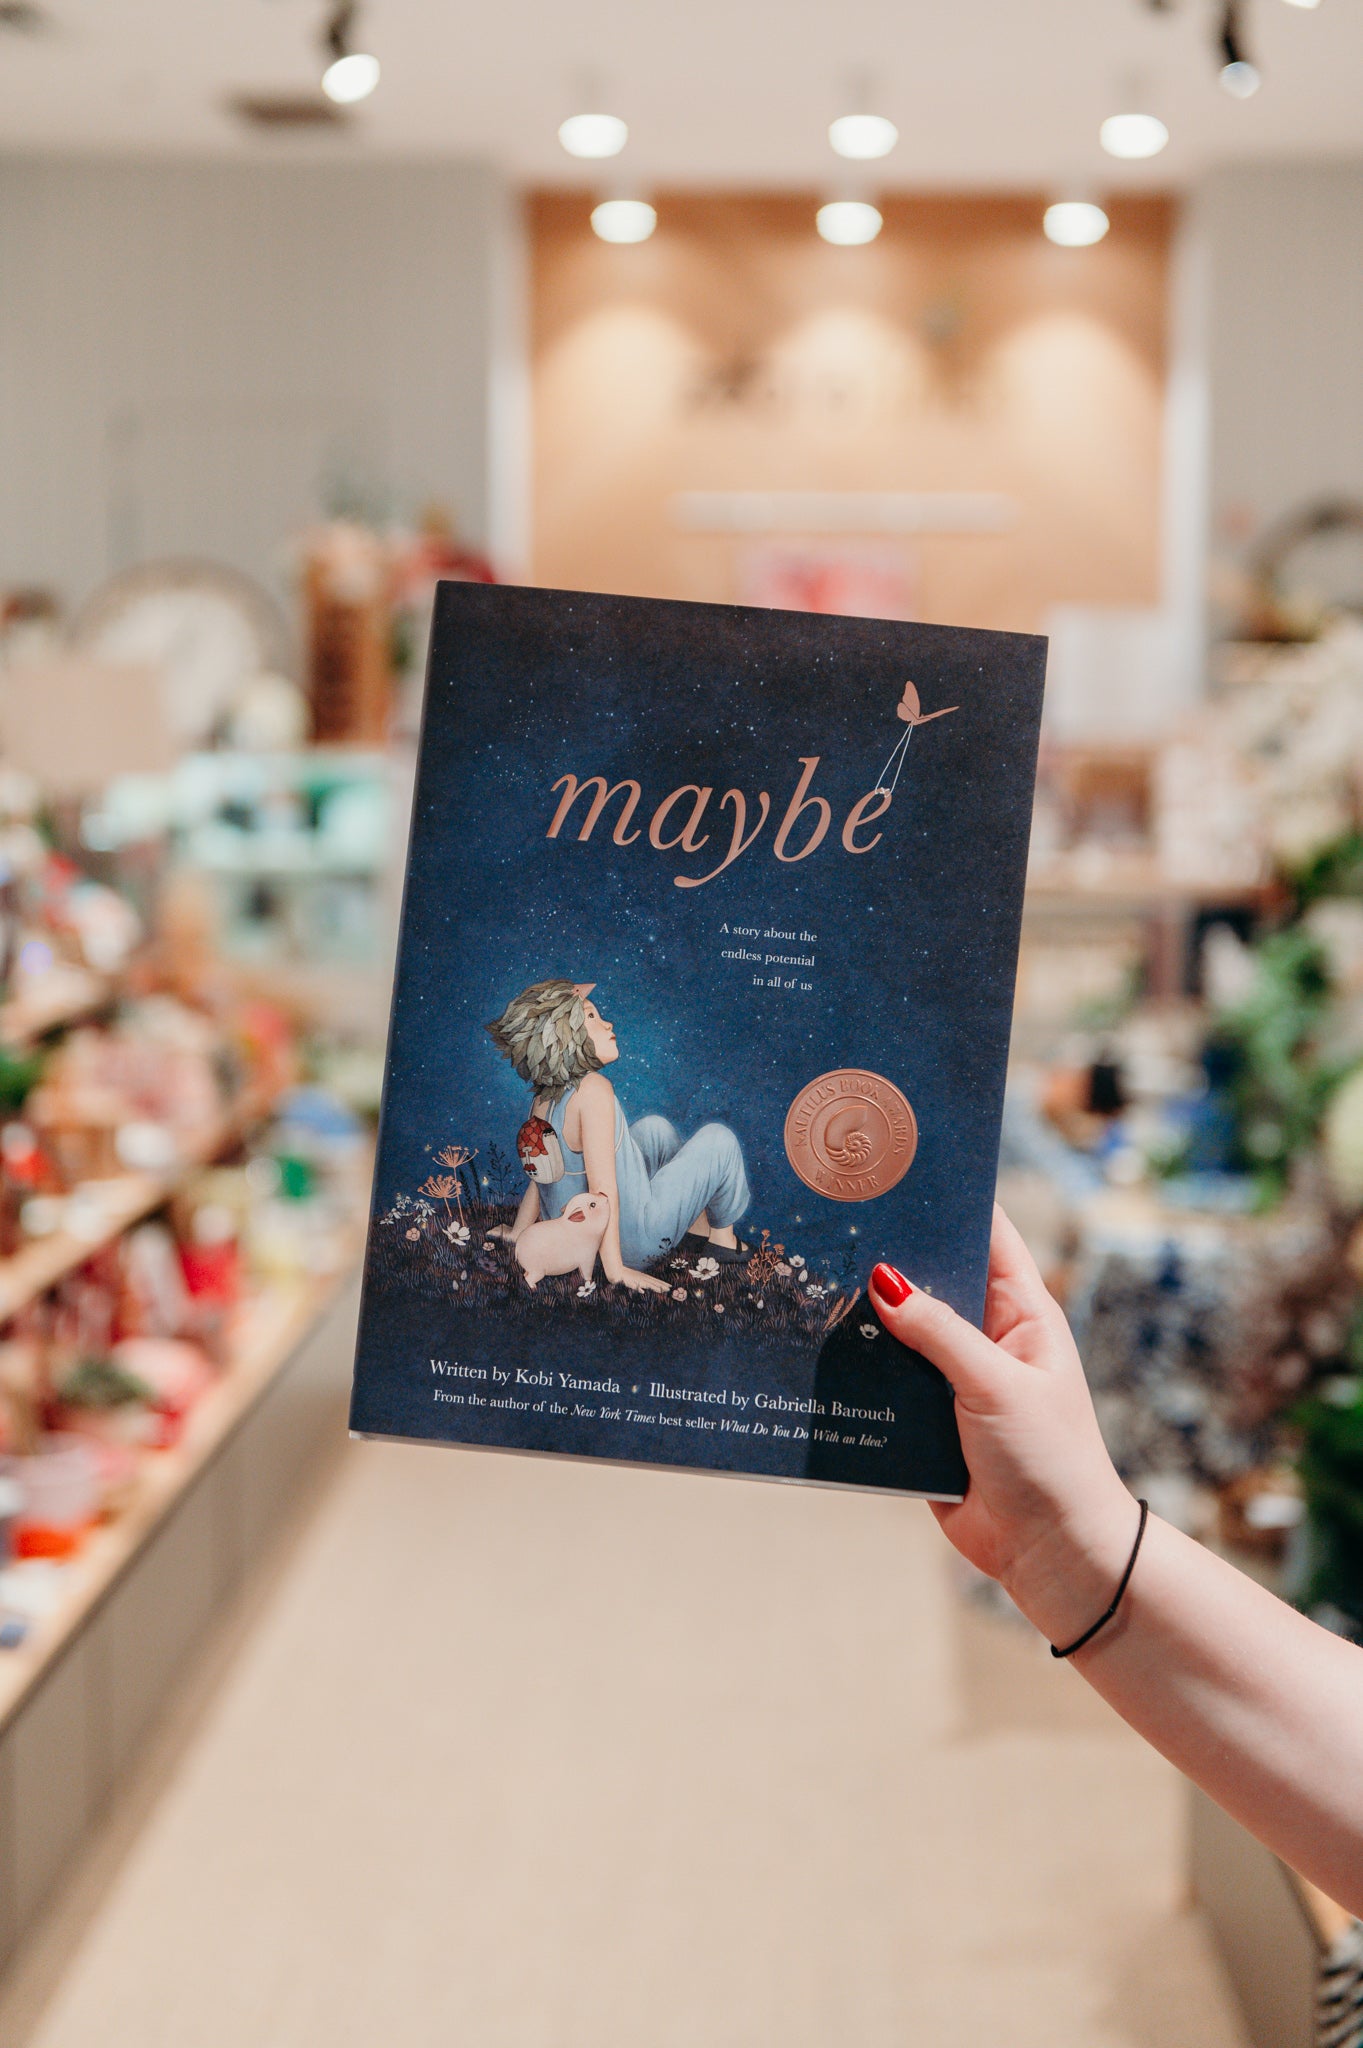 Children's book called Maybe that has a child sitting next to a pig on the front cover, looking up at the night sky.